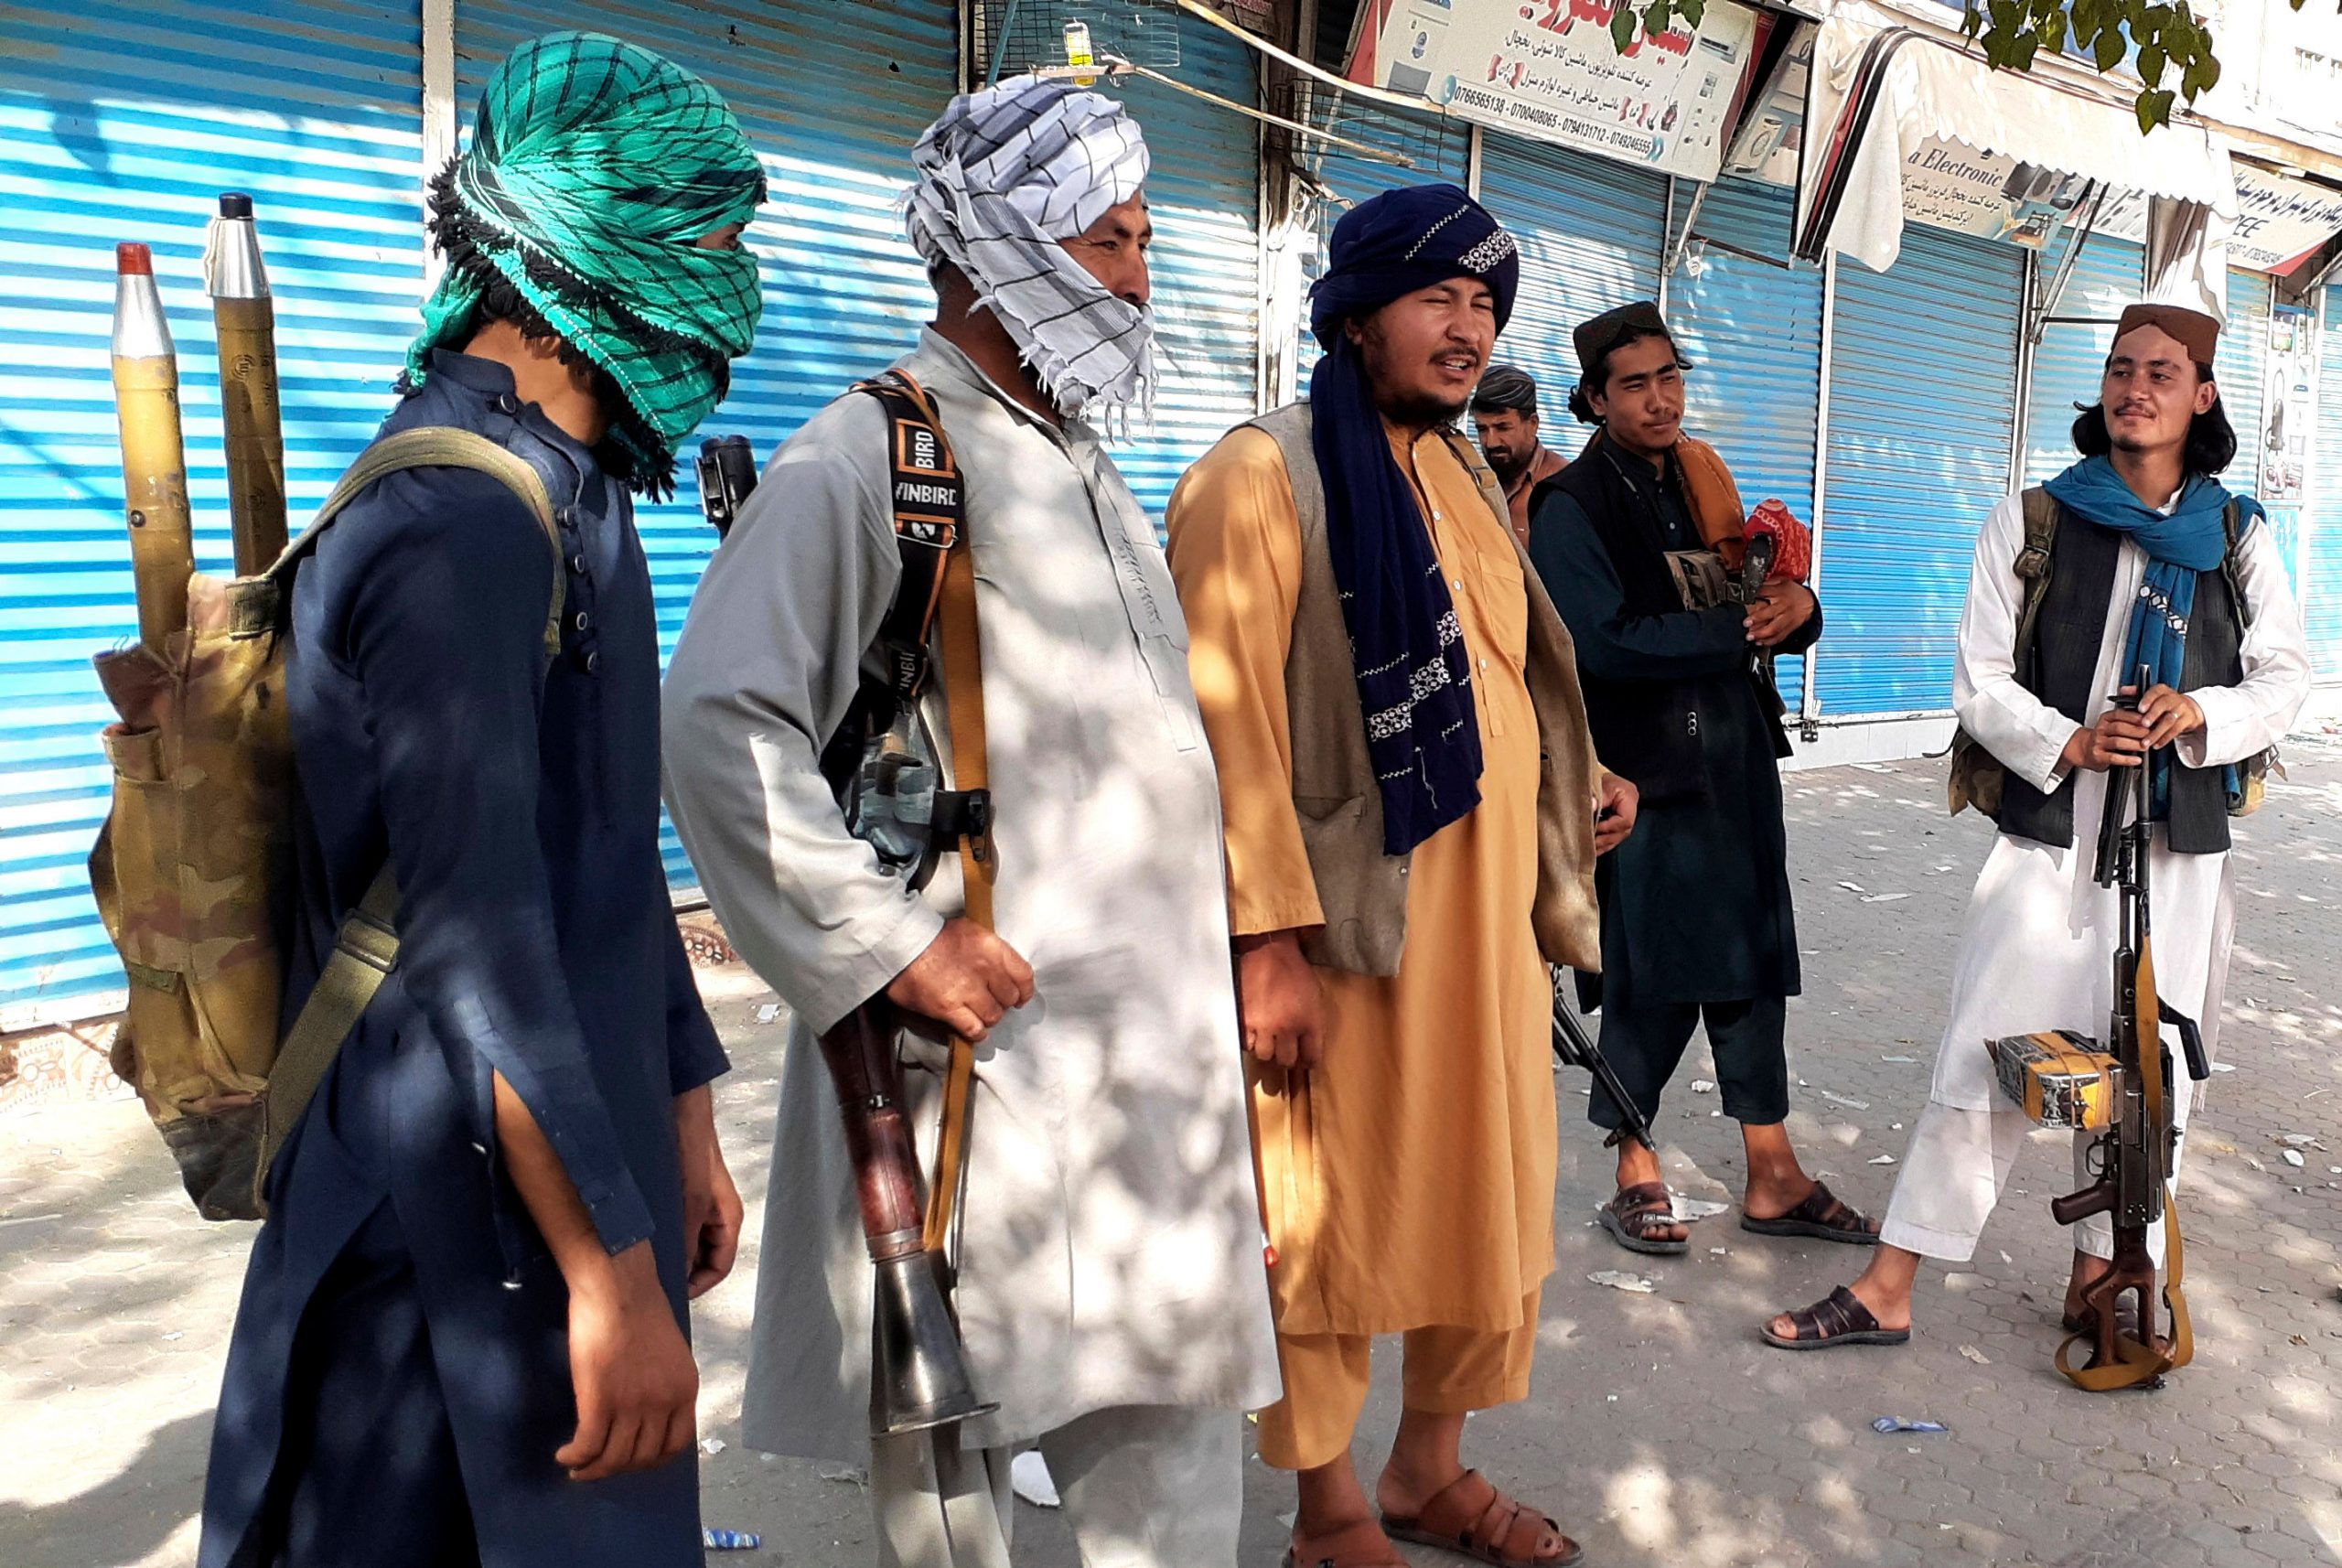 Why is the US pulling out of Afghanistan amid Taliban takeover?